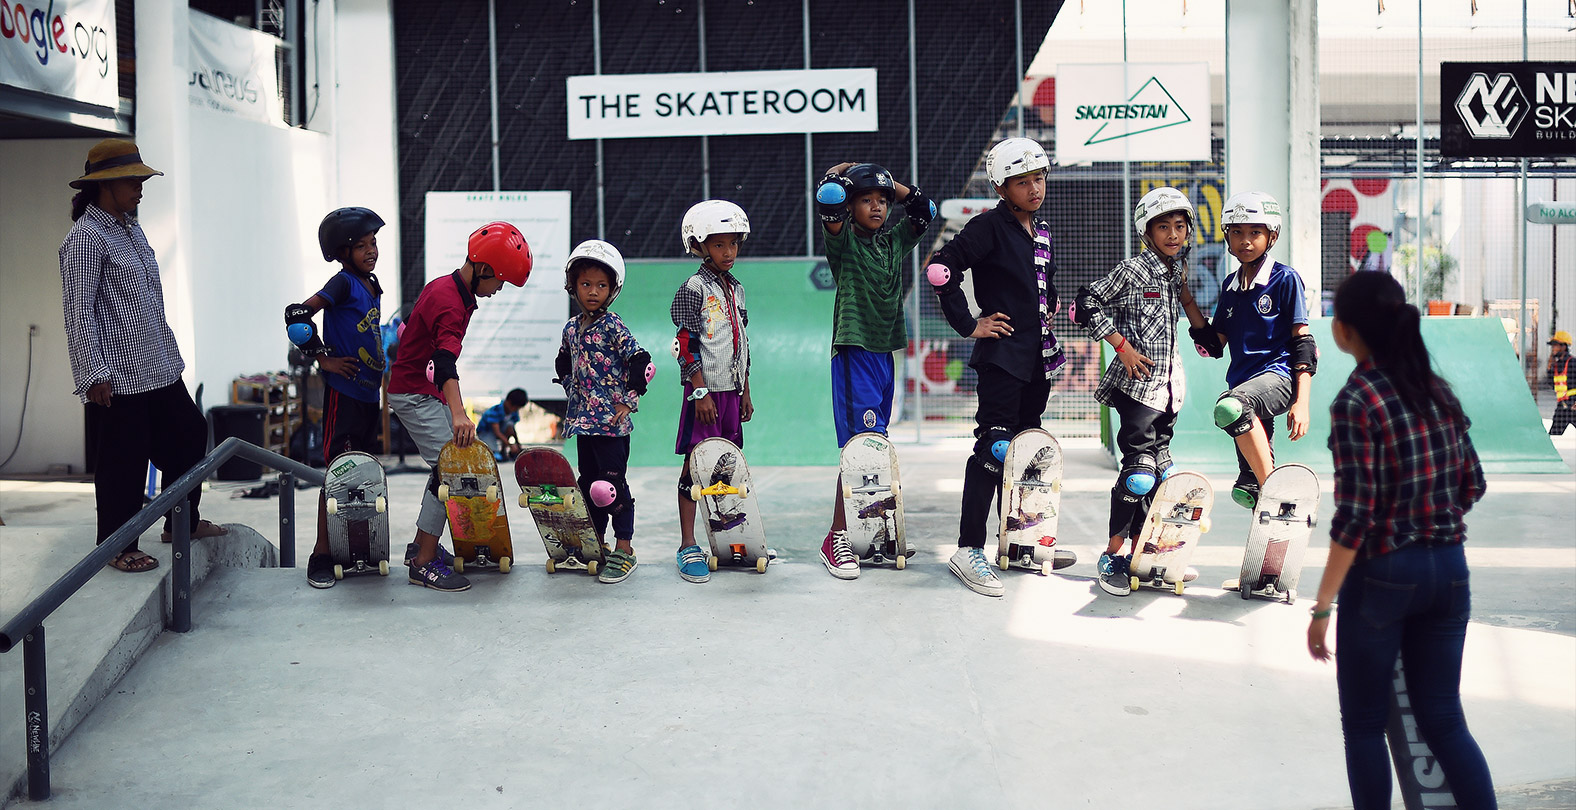 Skateistan supported by TSG